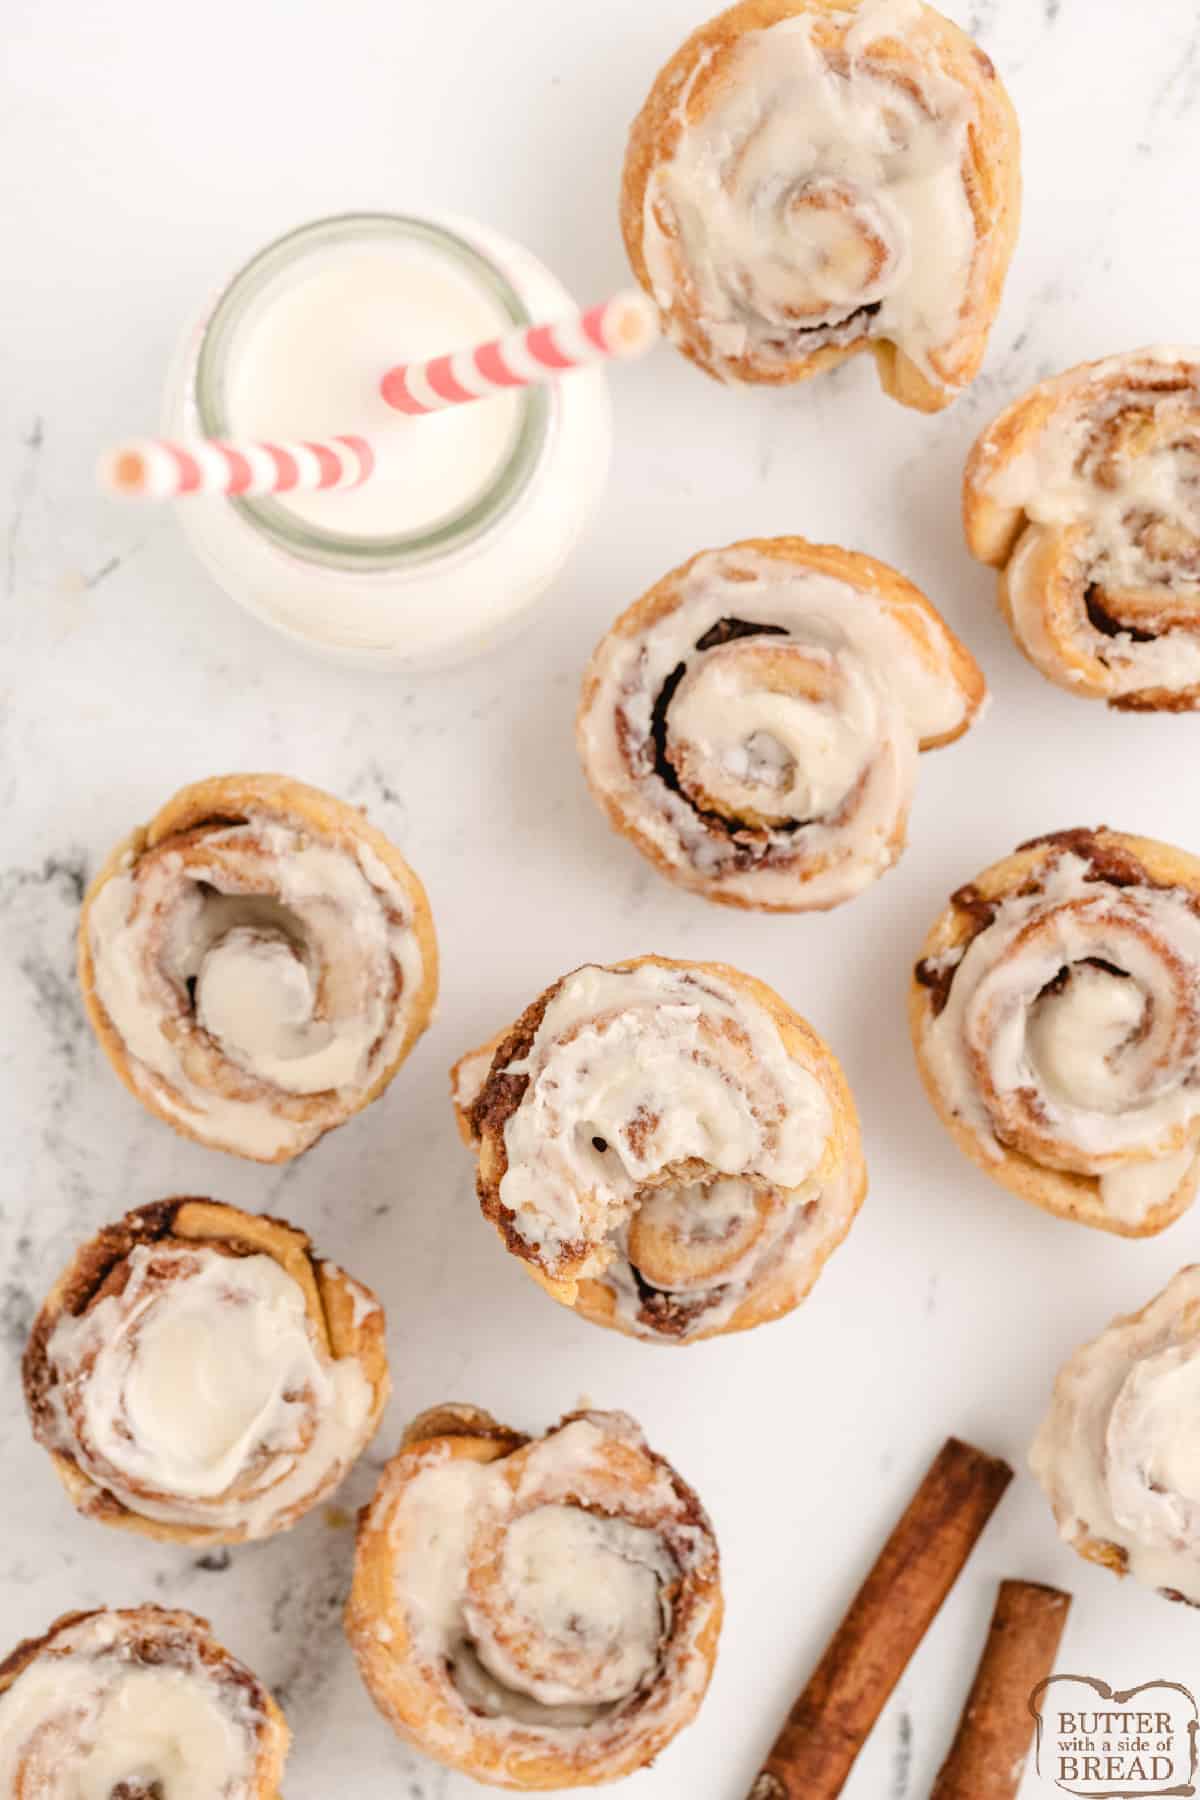 Homemade cinnamon rolls made in 15 minutes